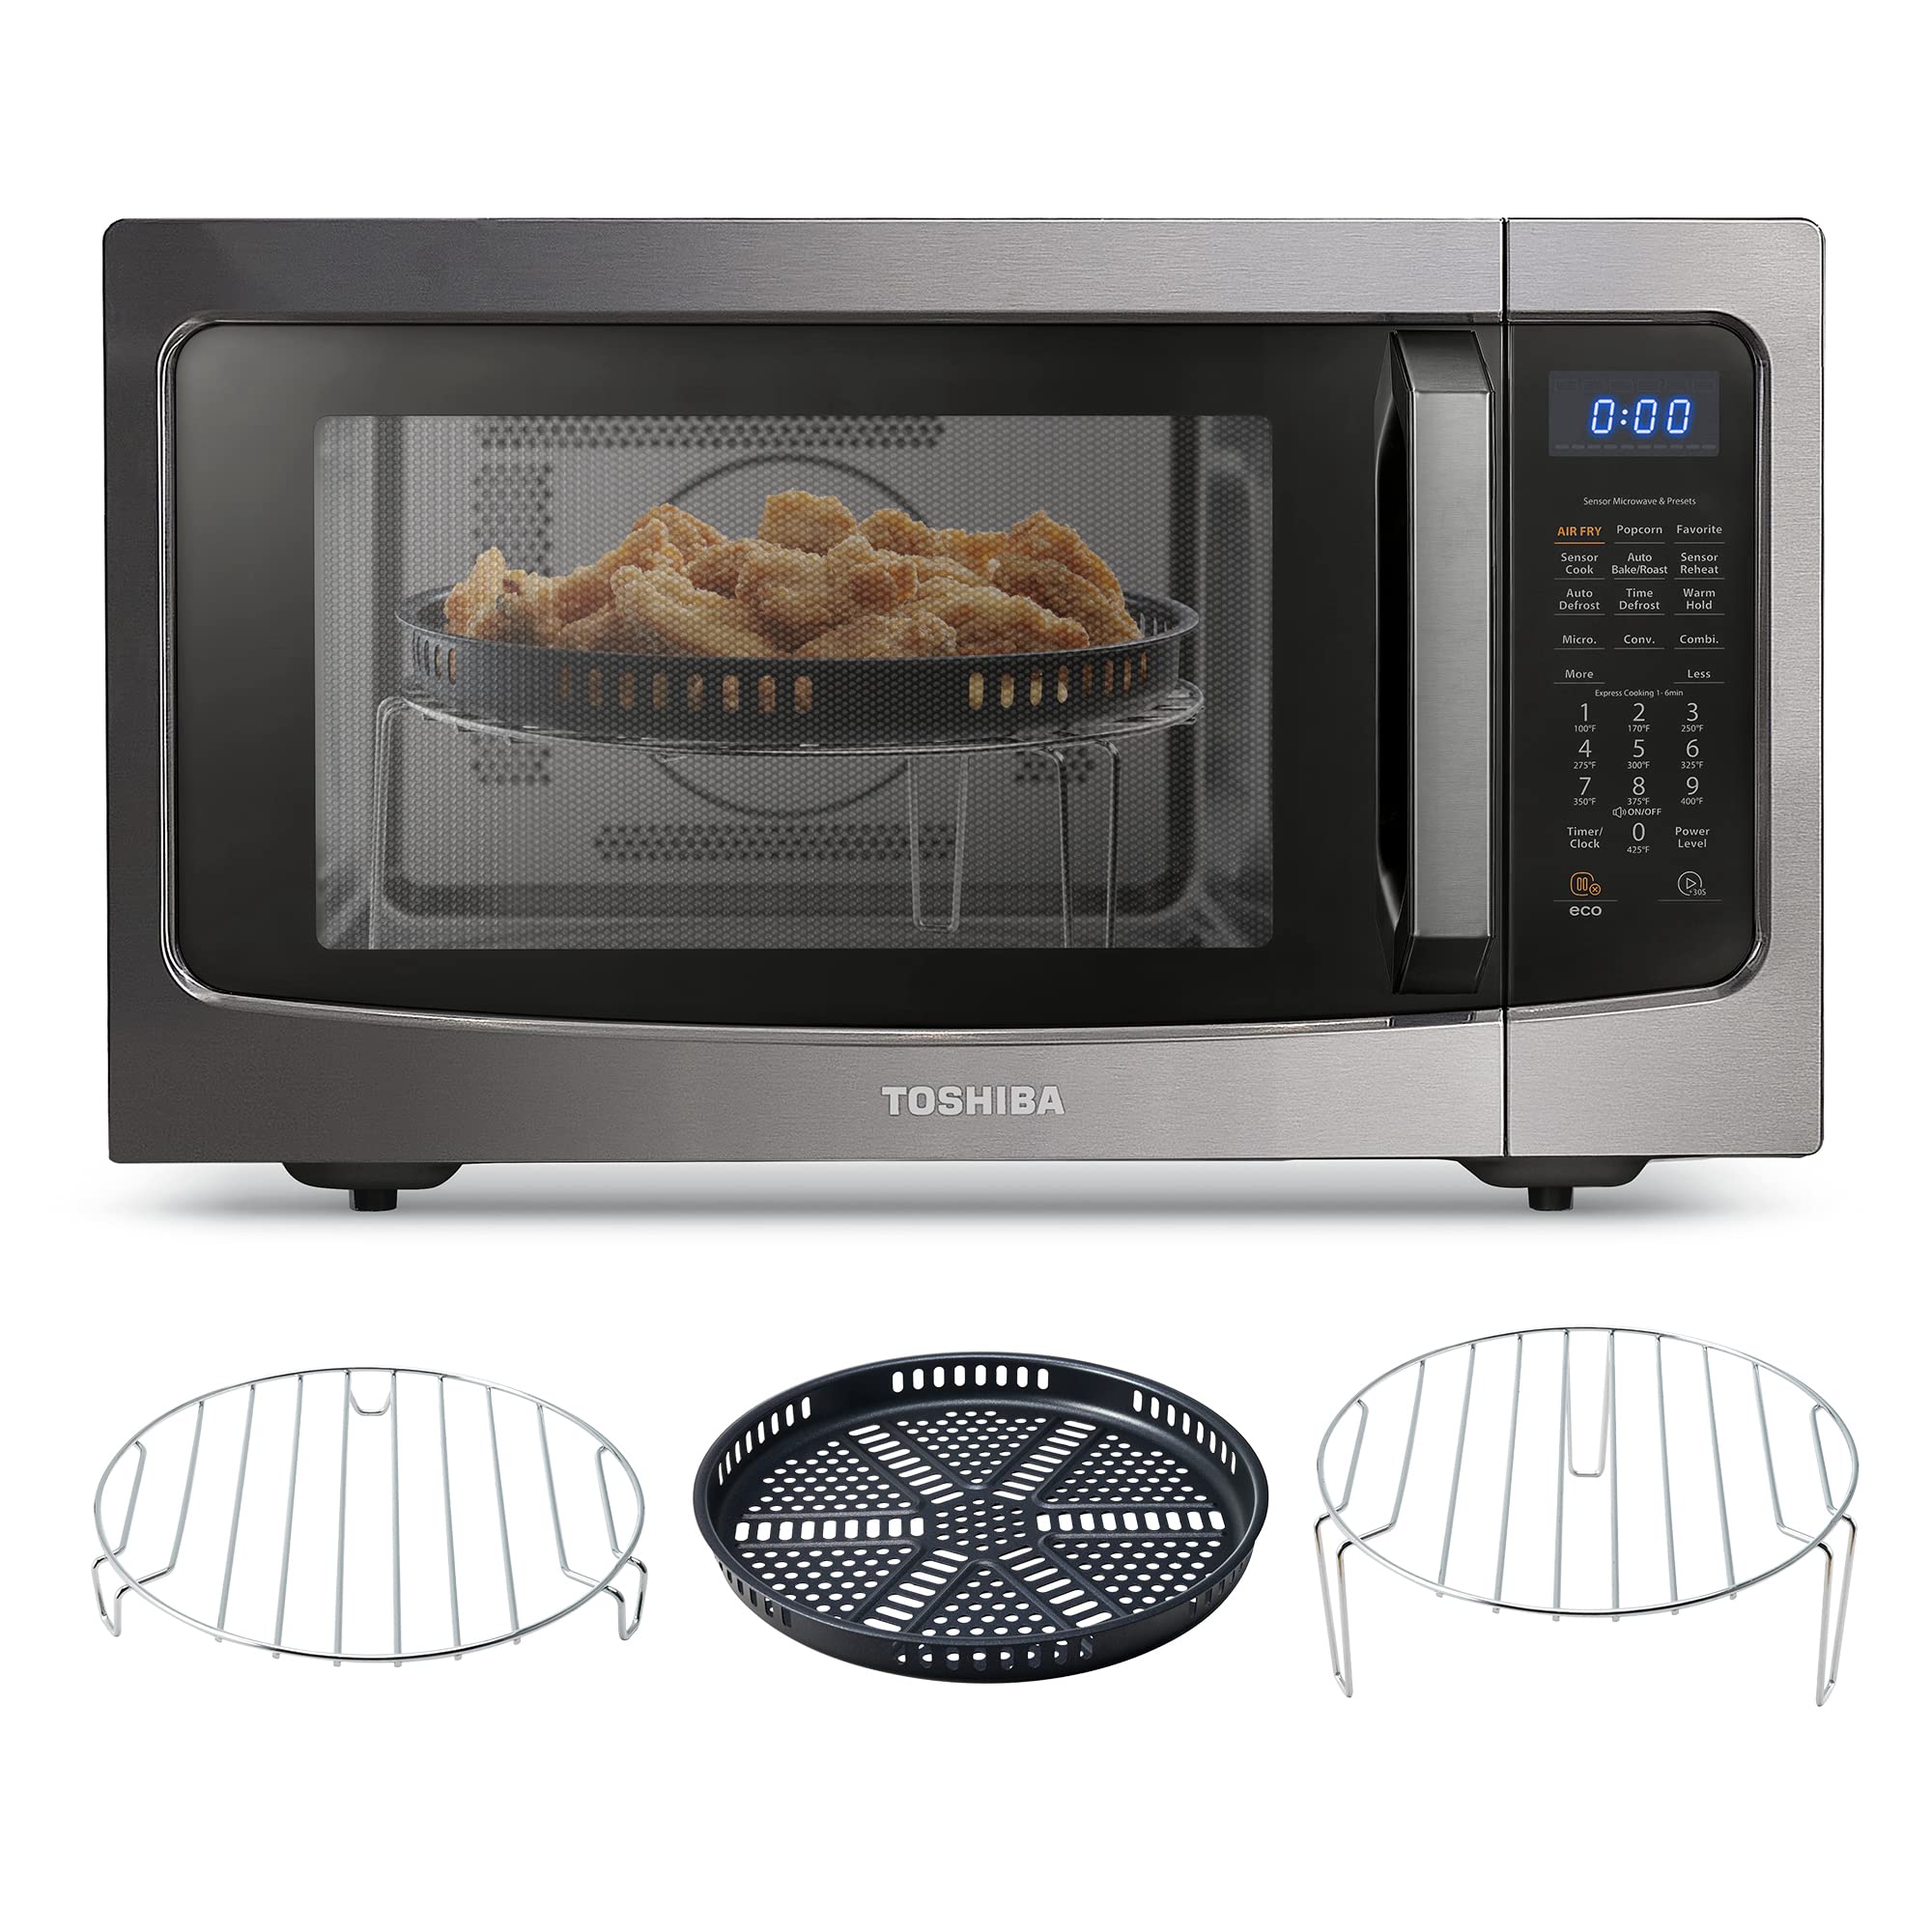 Toshiba 4-in-1 ML-EC42P(BS) Countertop Microwave Oven, Smart Sensor, Convection, Air Fryer Combo, Mute Function, Position Memory 13.6